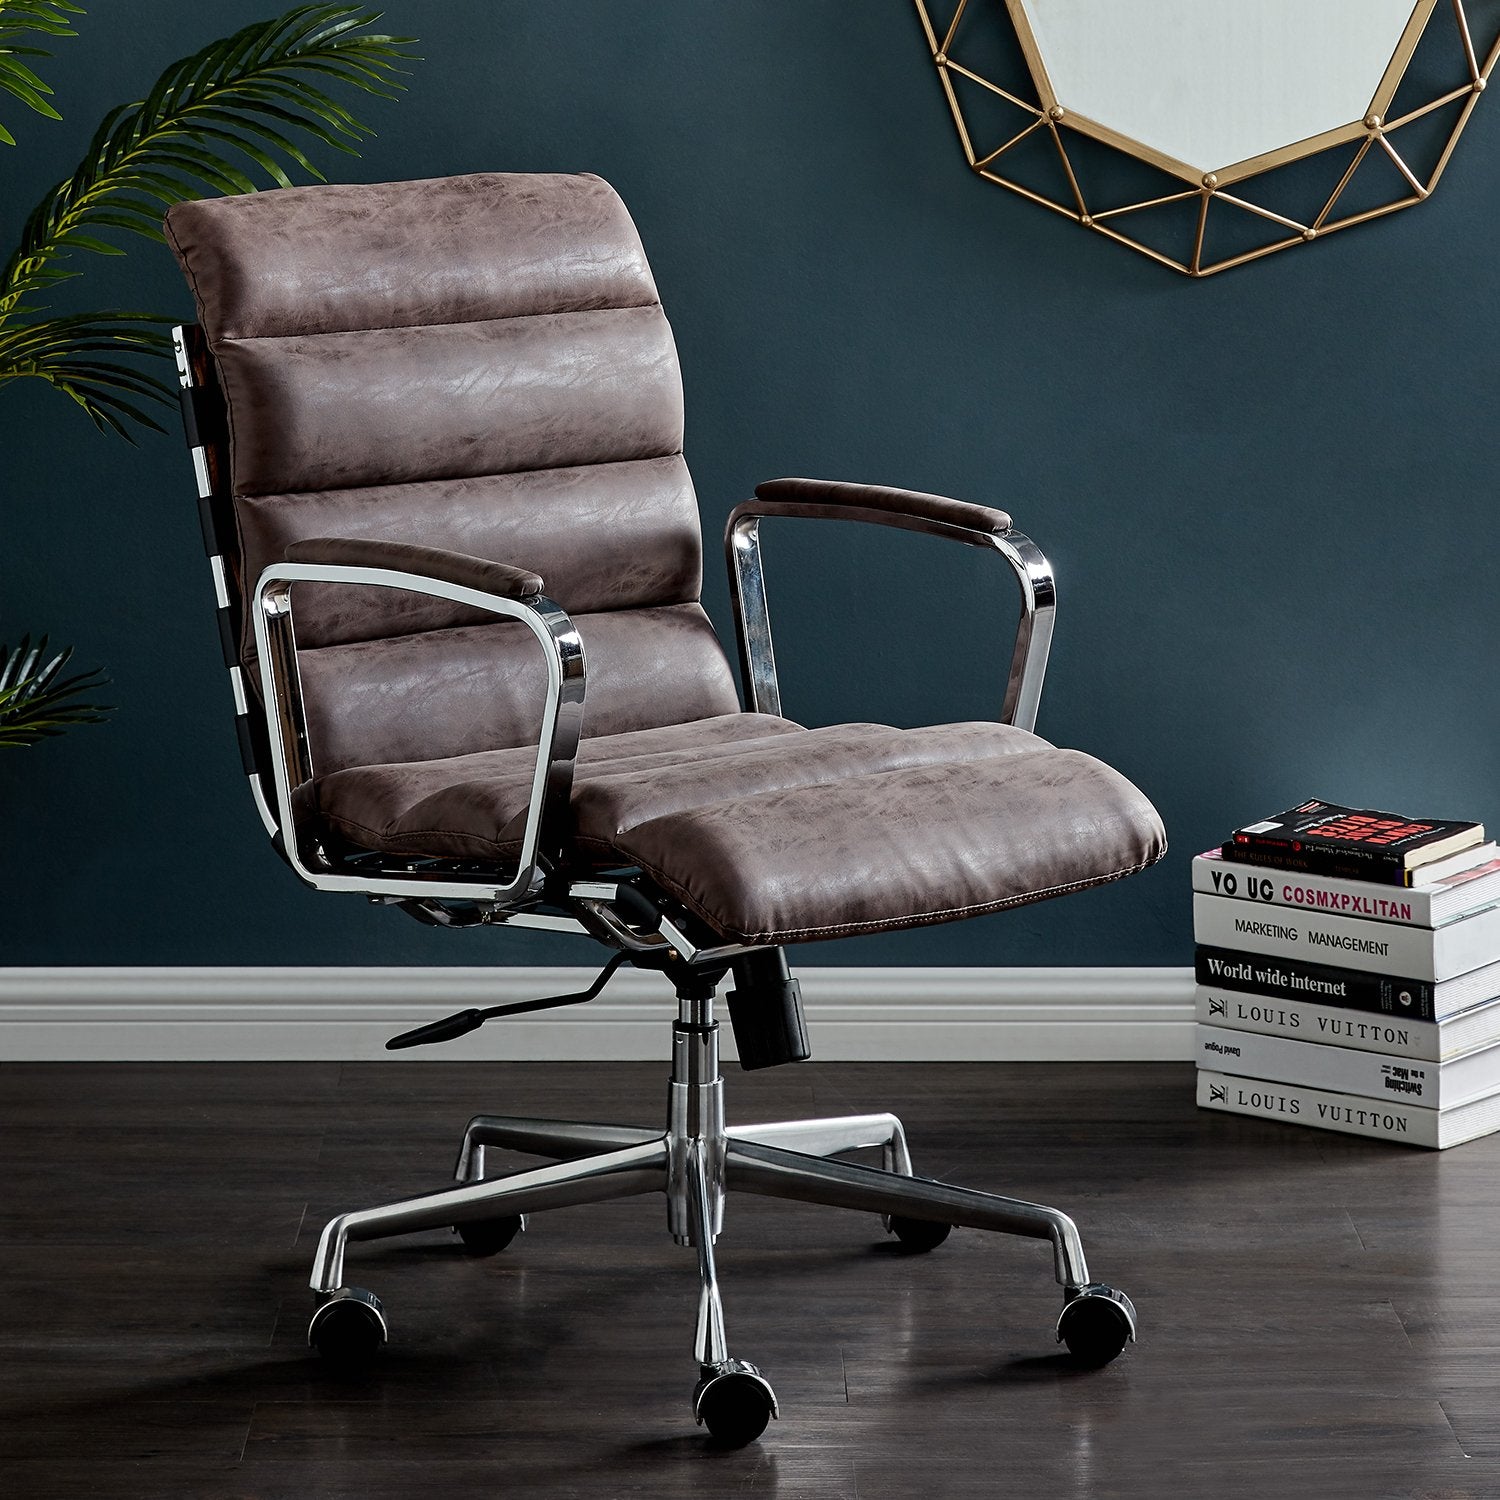 Kingston Vintage Effect Faux Leather Office Chair with Chrome Frame and Aluminium Base Brown